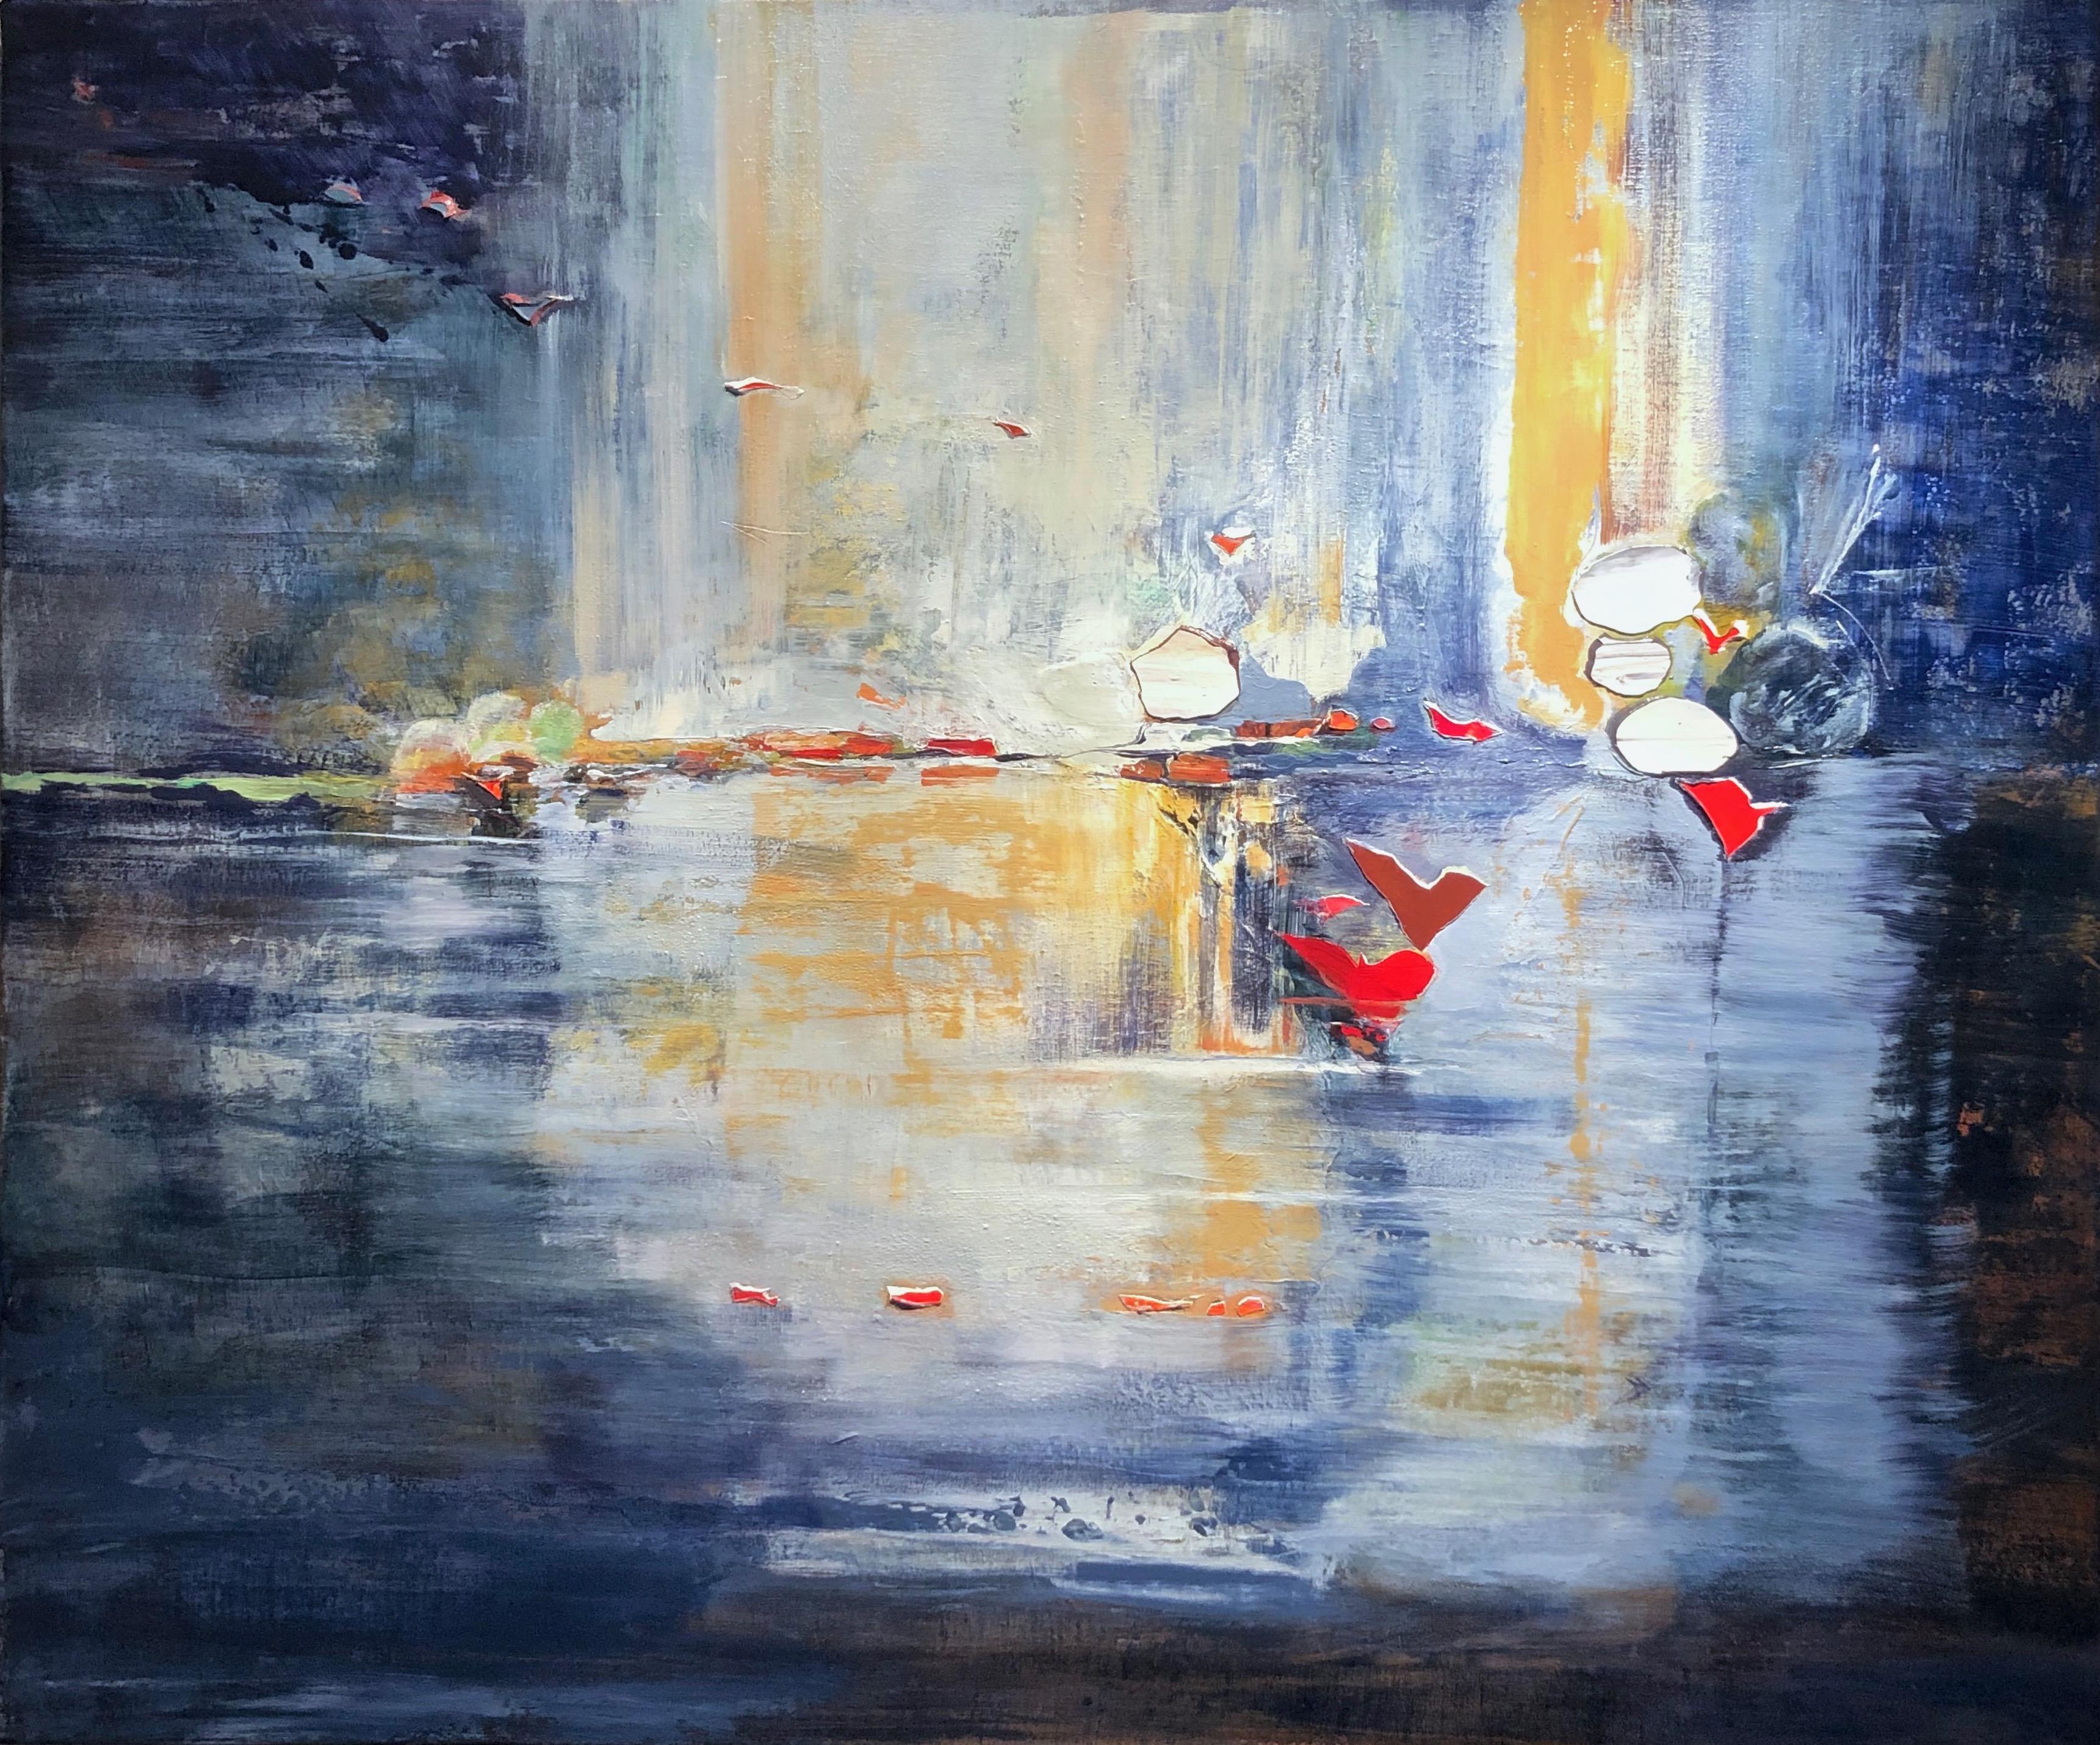 Andrei Petrov Figurative Painting - SANCTUARY - Large gestural abstract painting in shades of blue